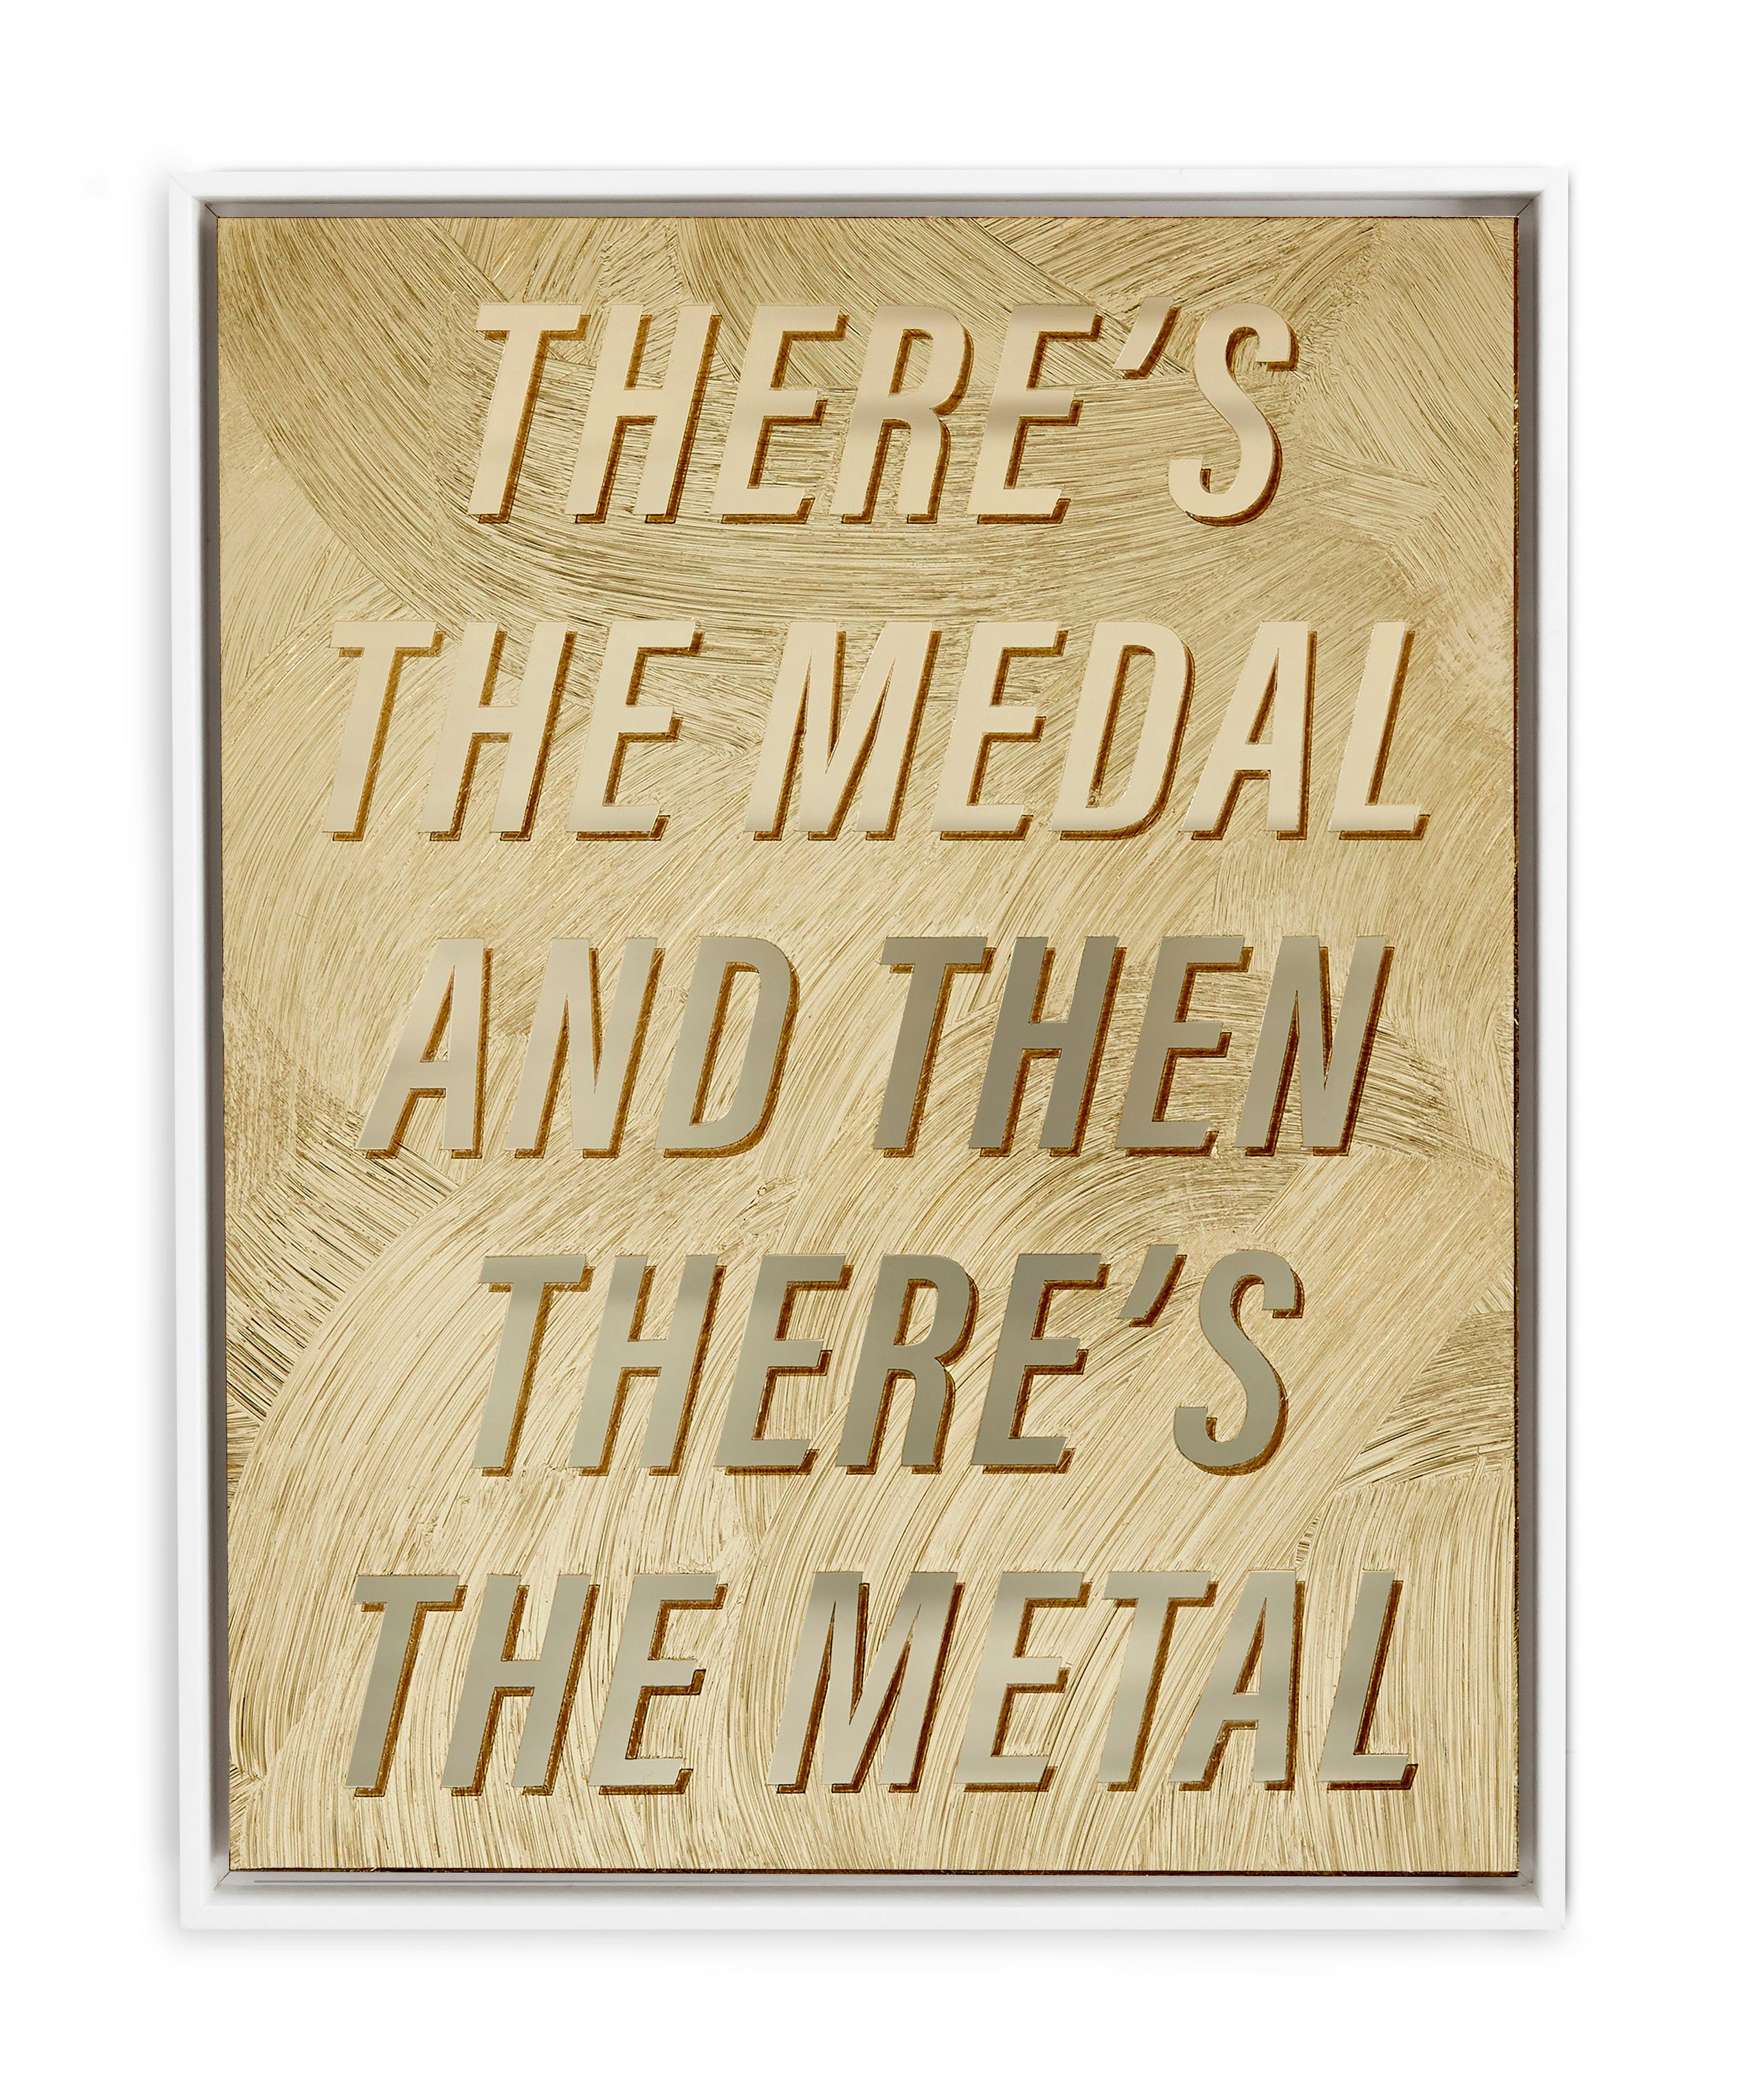 Mixed Media by Ben Skinner titled "There's The Metal".